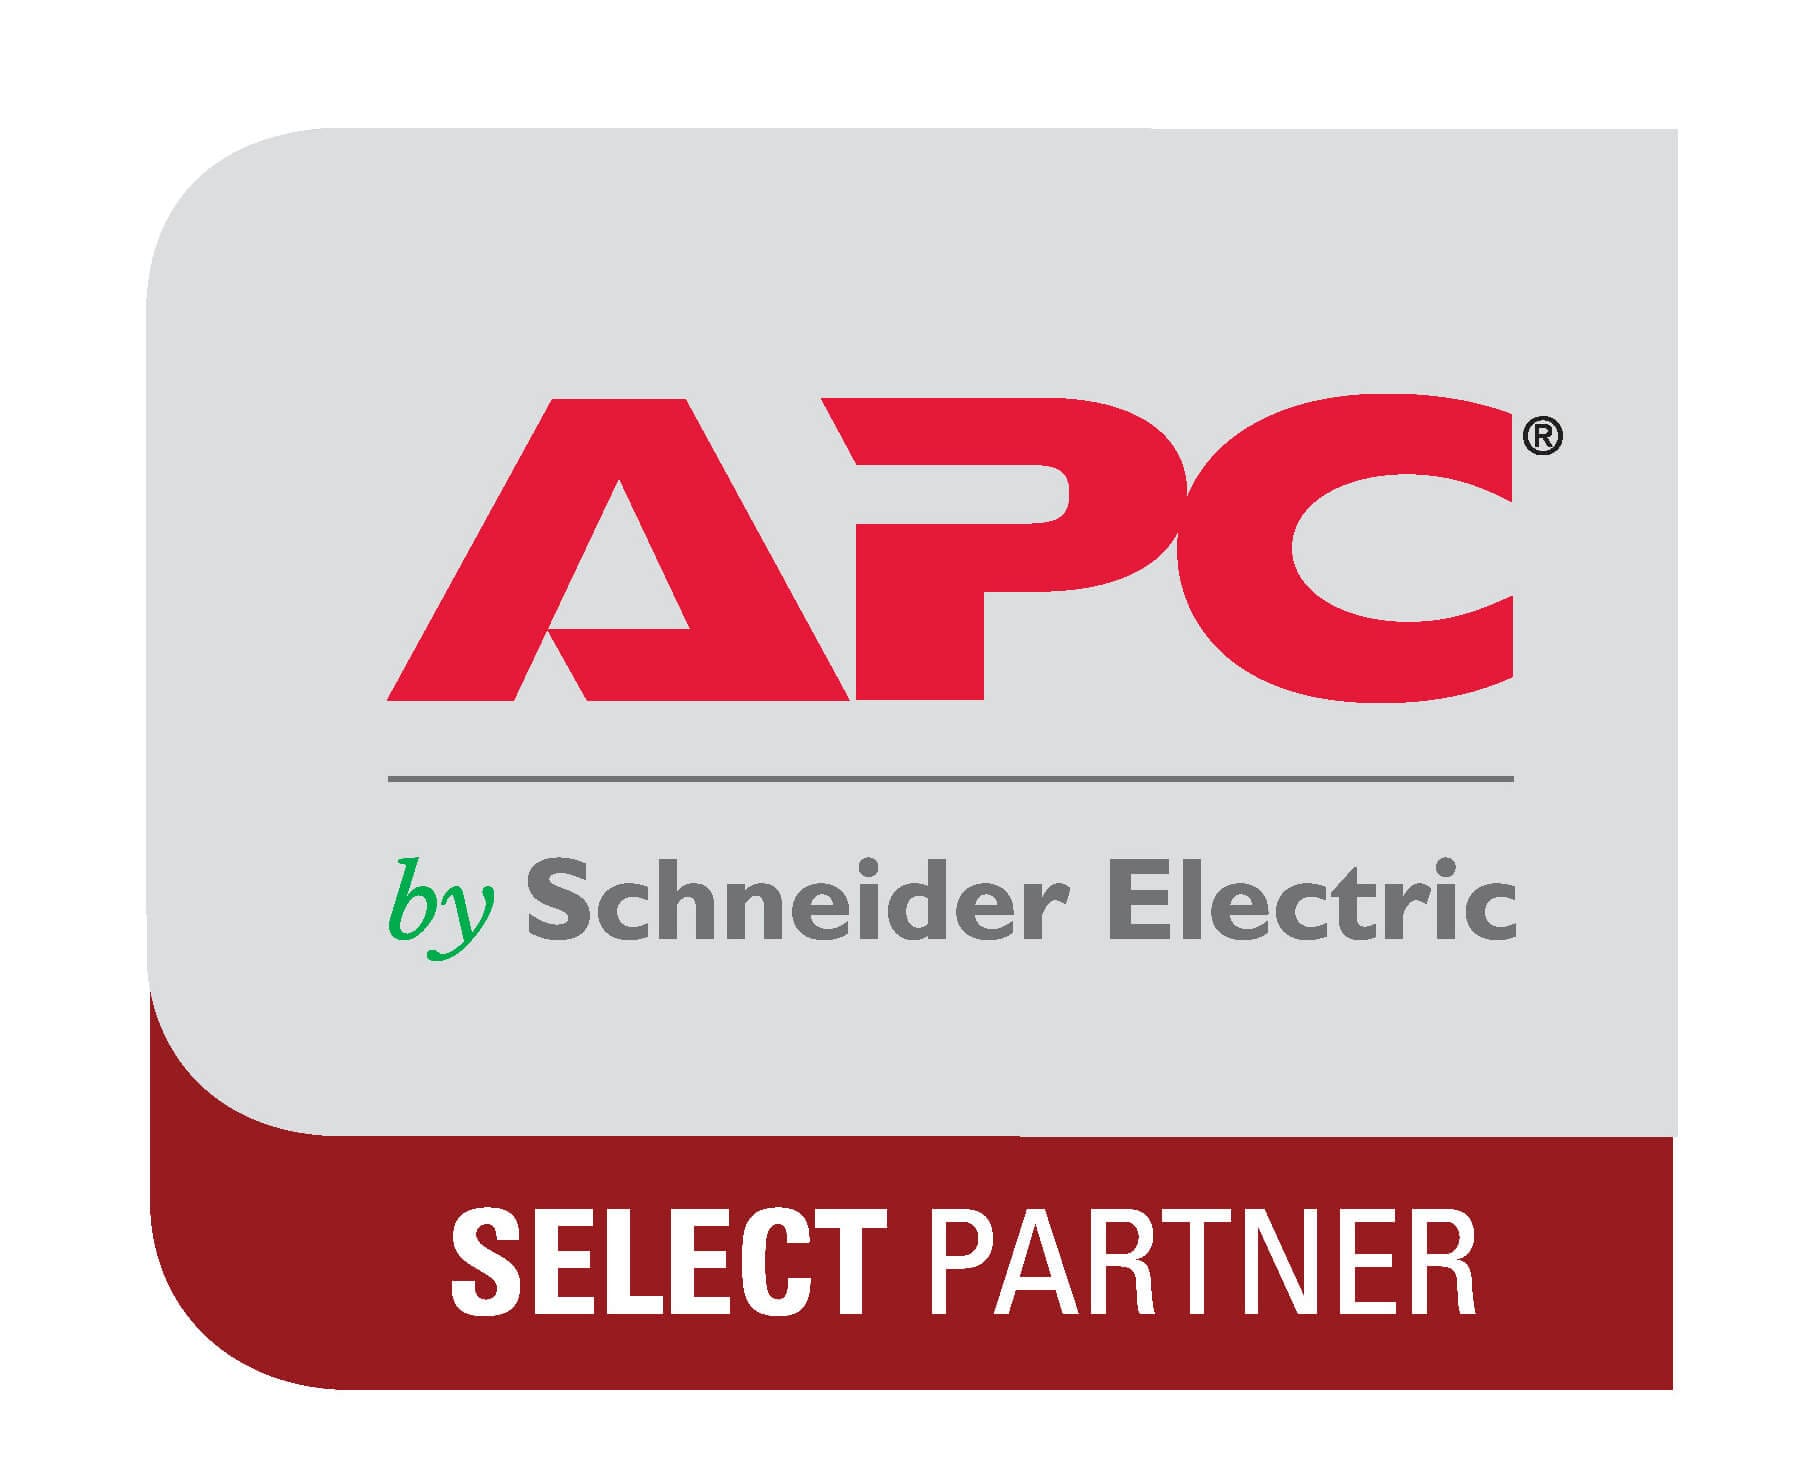 A red and white apc logo on top of a gray background.